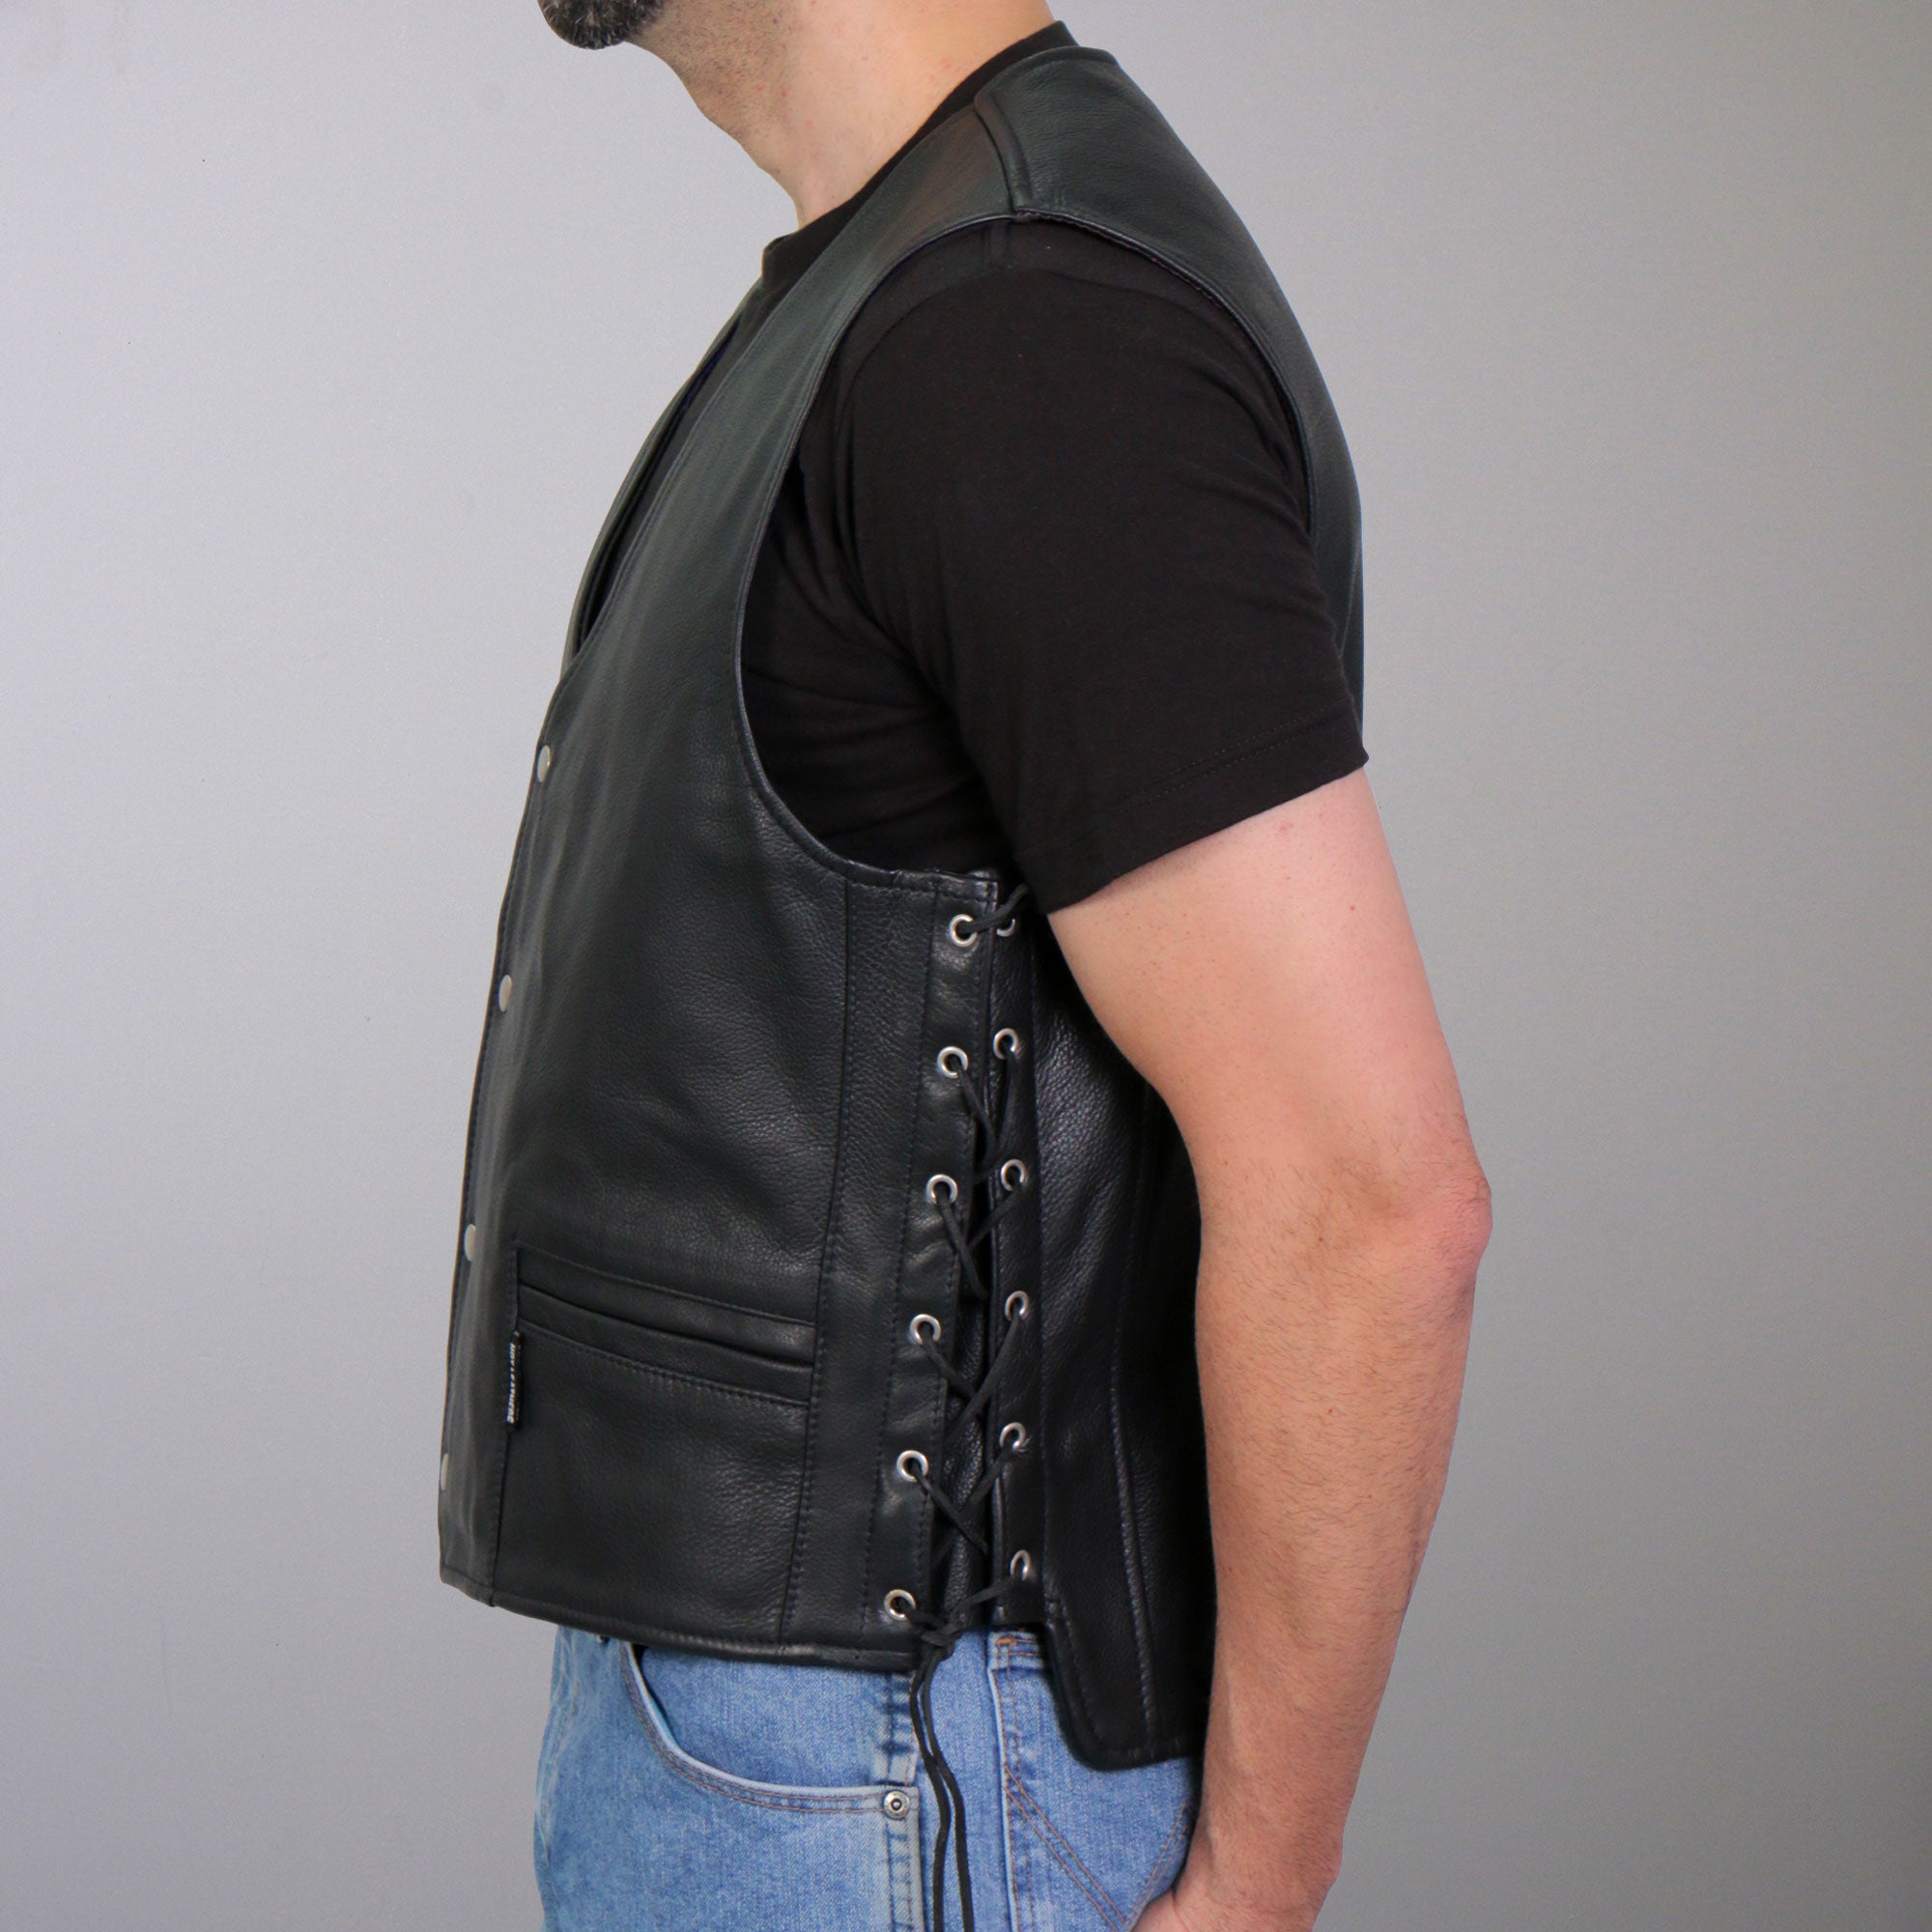 Hot Leathers VSM1066 Men's Black 'V-Twin Eagle' Motorcycle style Conceal and Carry Side Lace Leather Biker Vest